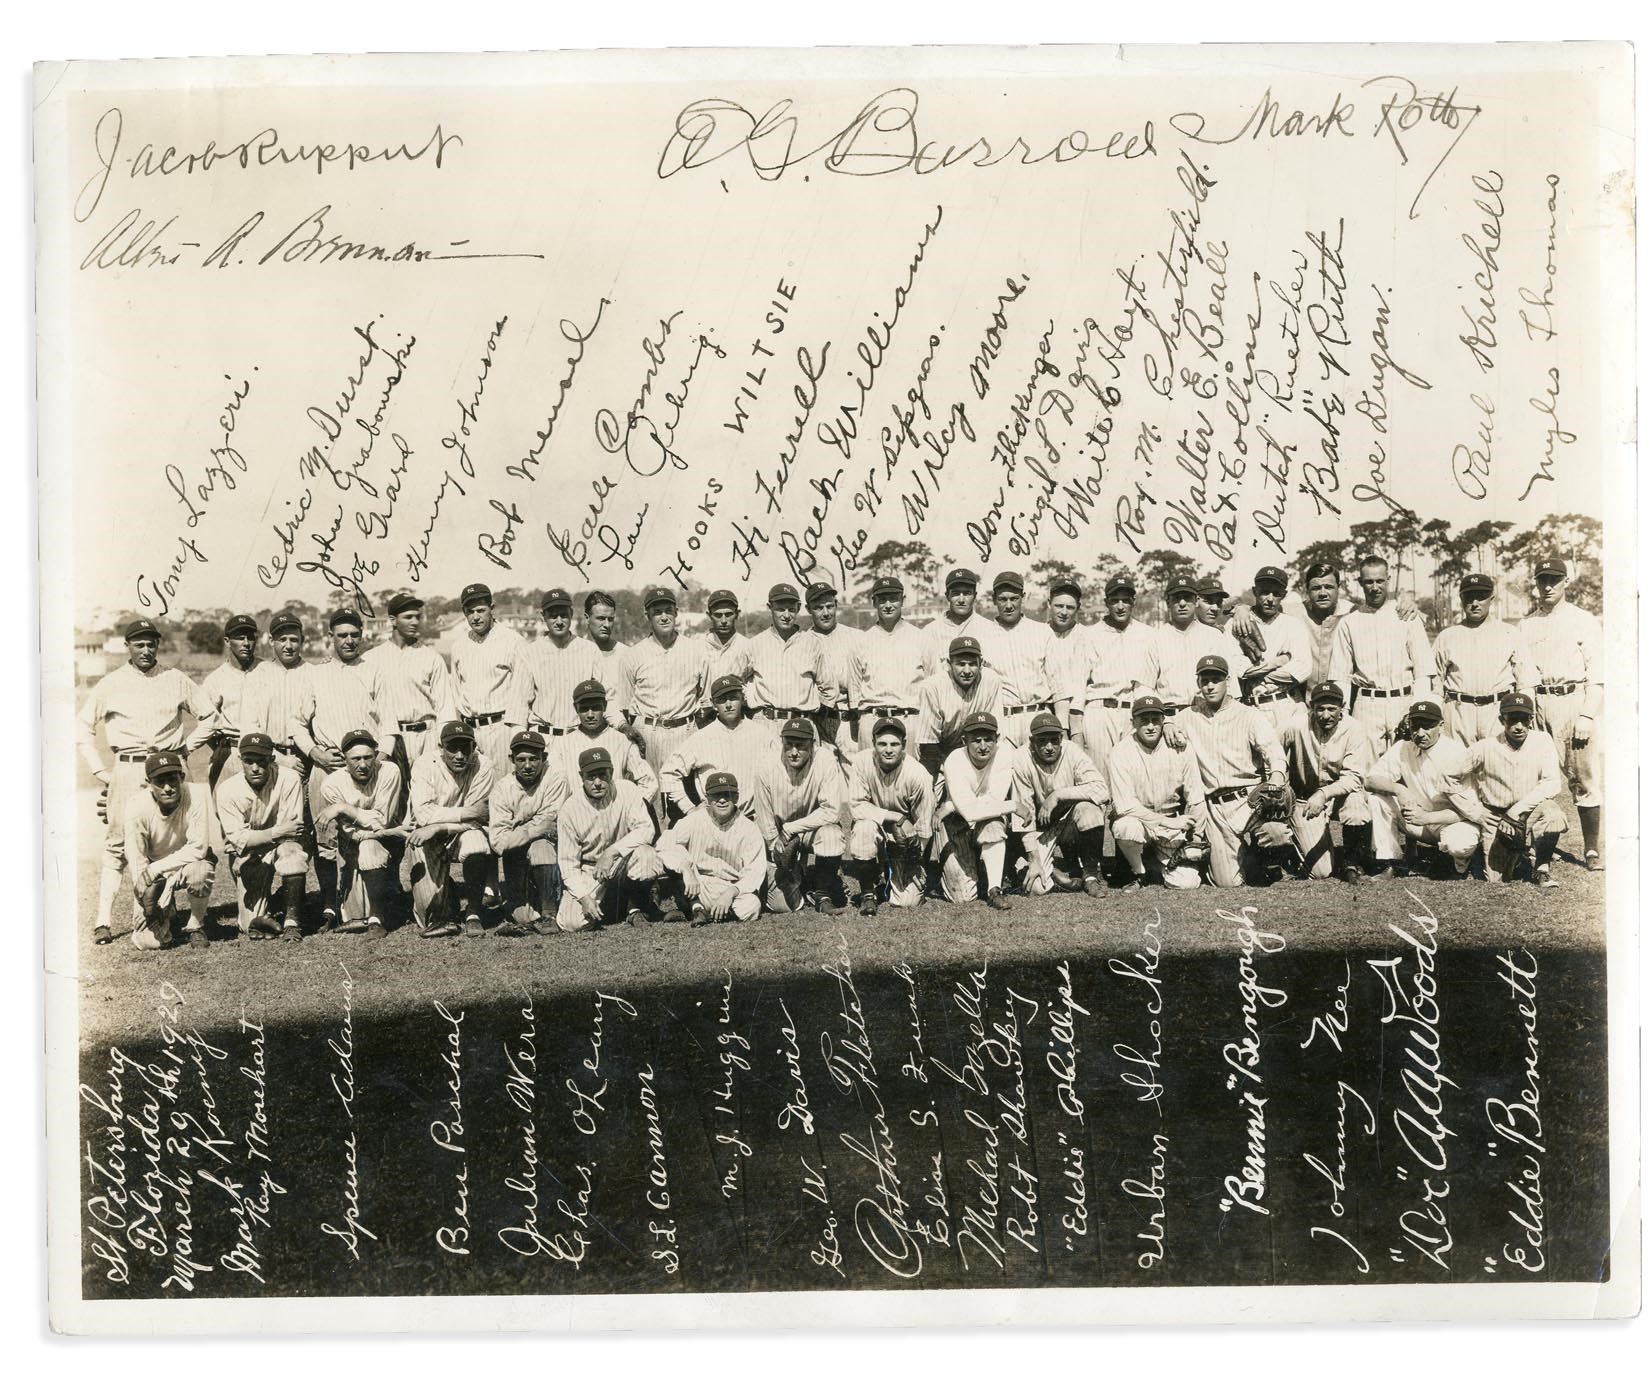 NY Yankees, Giants & Mets - 1927 New York Yankees Photograph with Facsimilie Signatures